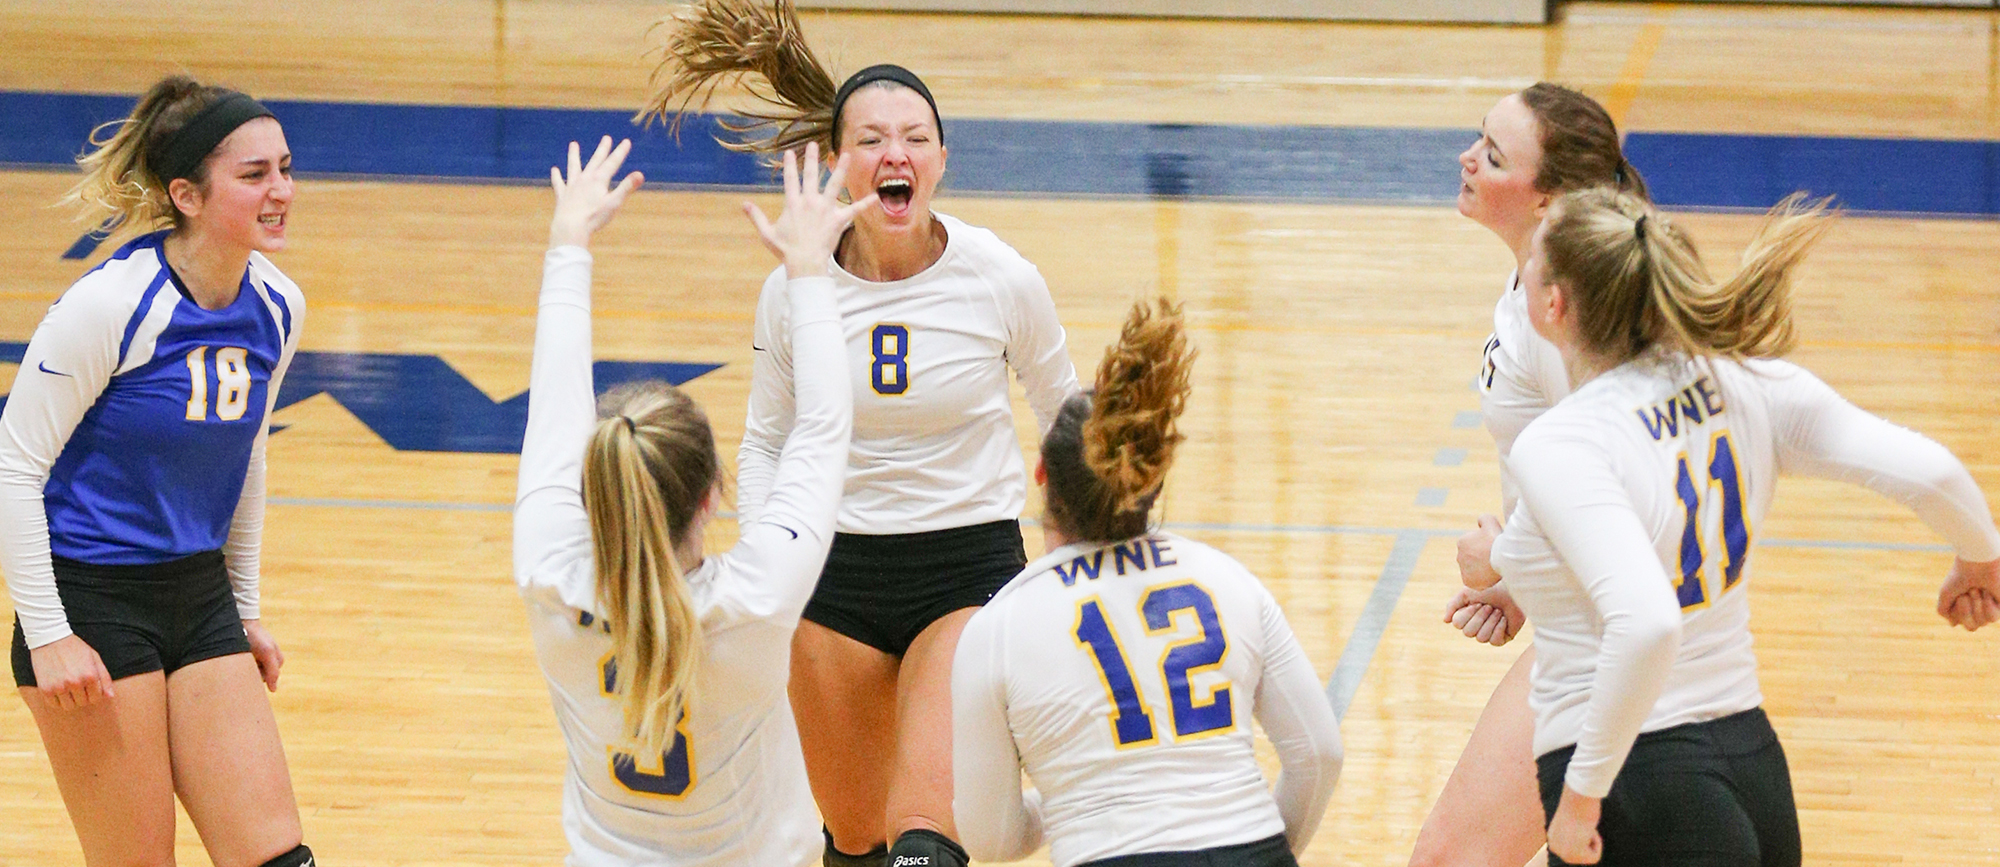 Western New England rallied from a 2-0 set deficit to defeat Emmanuel 3-2 on Thursday evening. (Photo by Chris Marion)